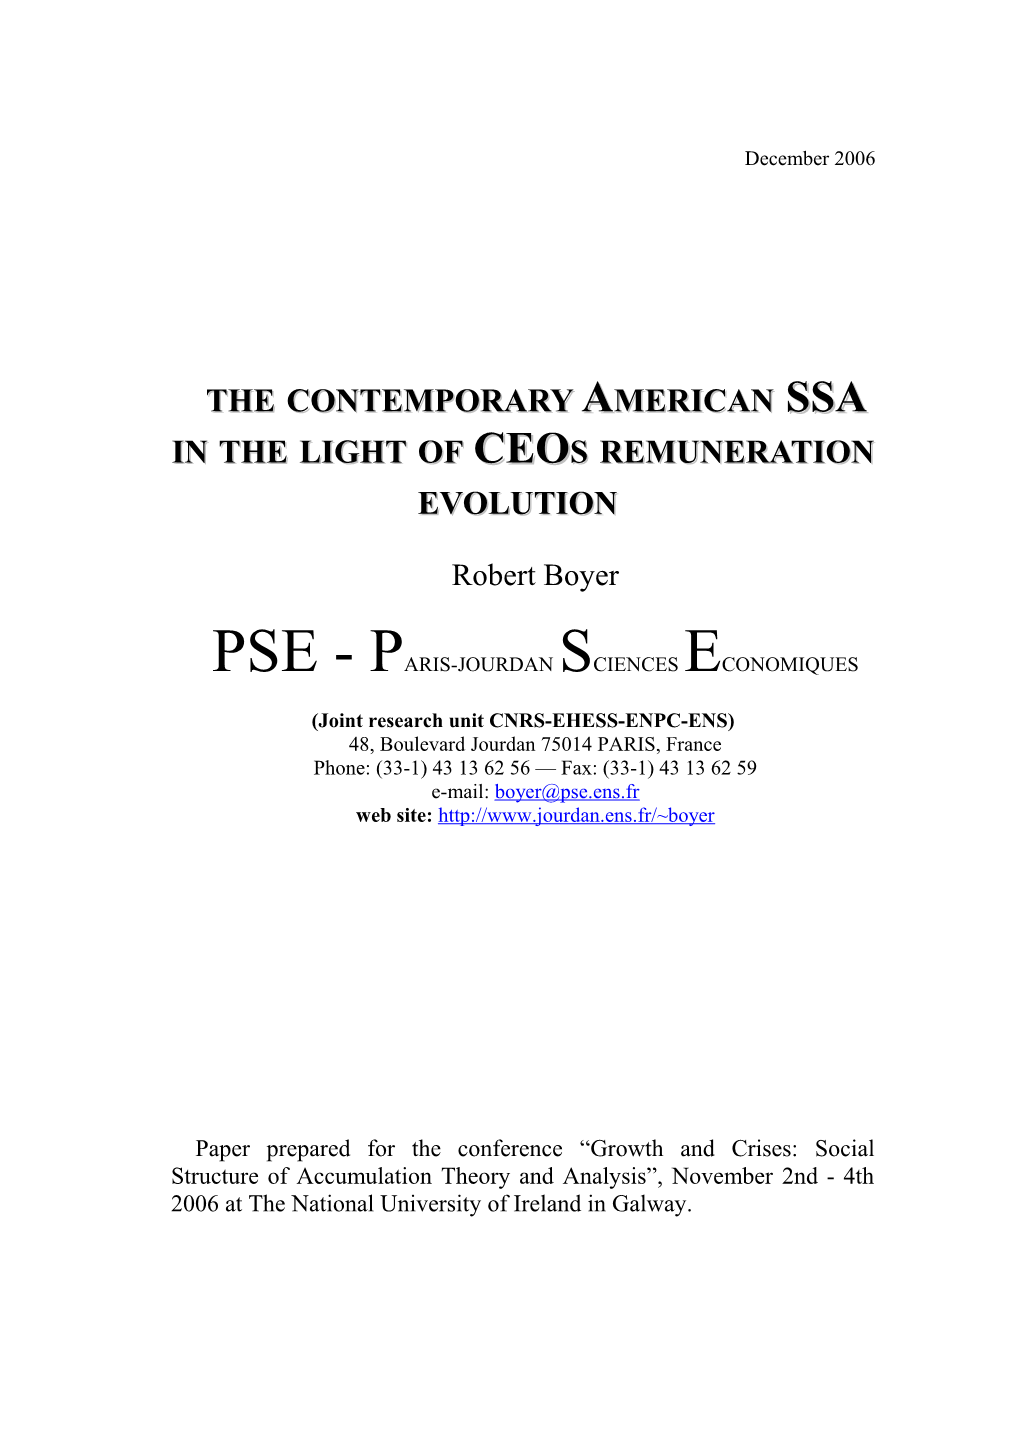 The Contemporary American SSA in the Light of Ceos Remuneration Evolution